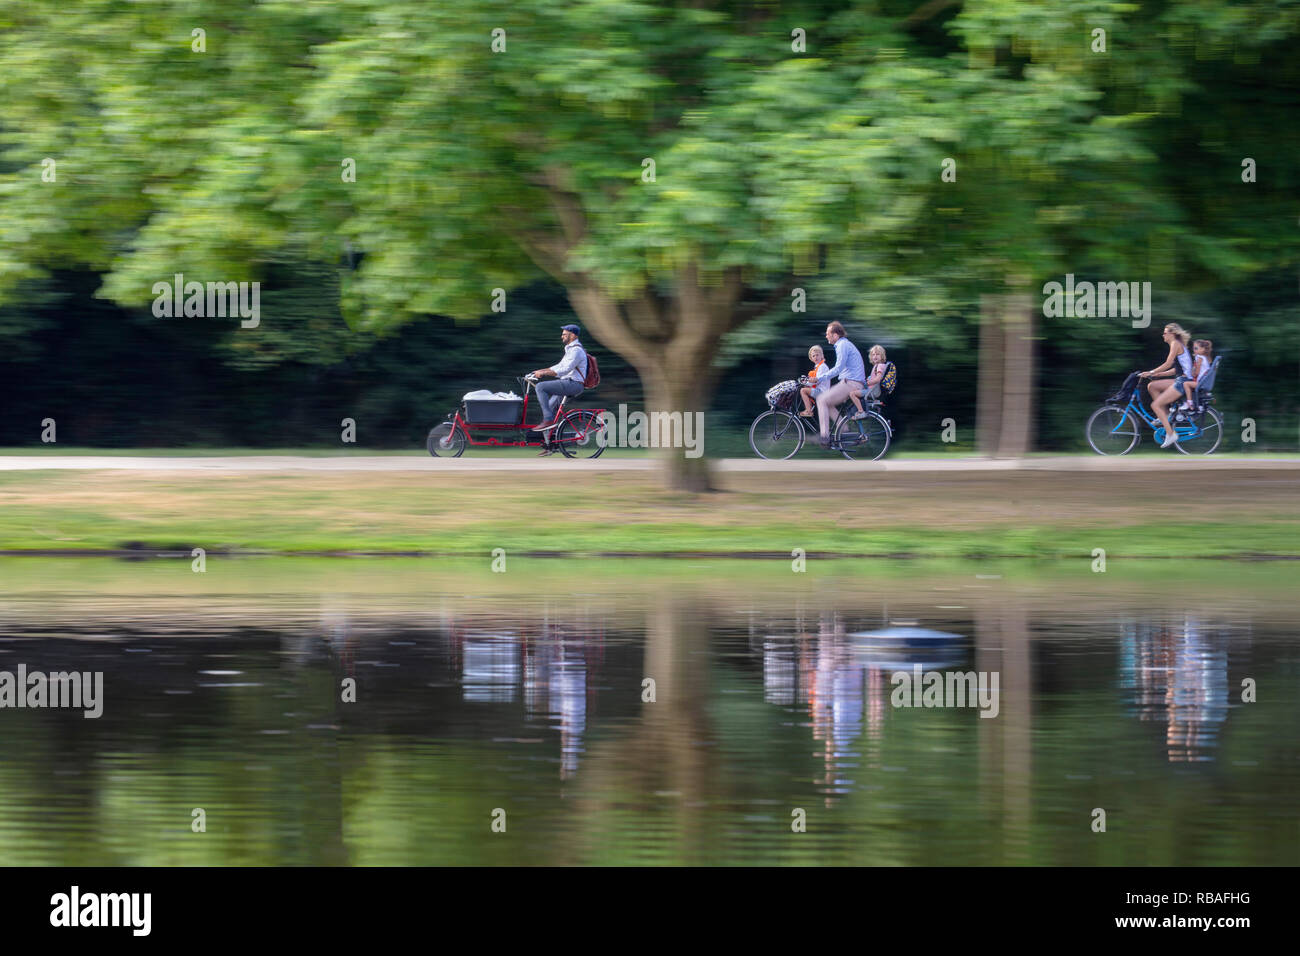 The Netherlands, Amsterdam. Vondelpark. Parents bring their children to school by bicycle, others go to work. Blurred motion. Stock Photo